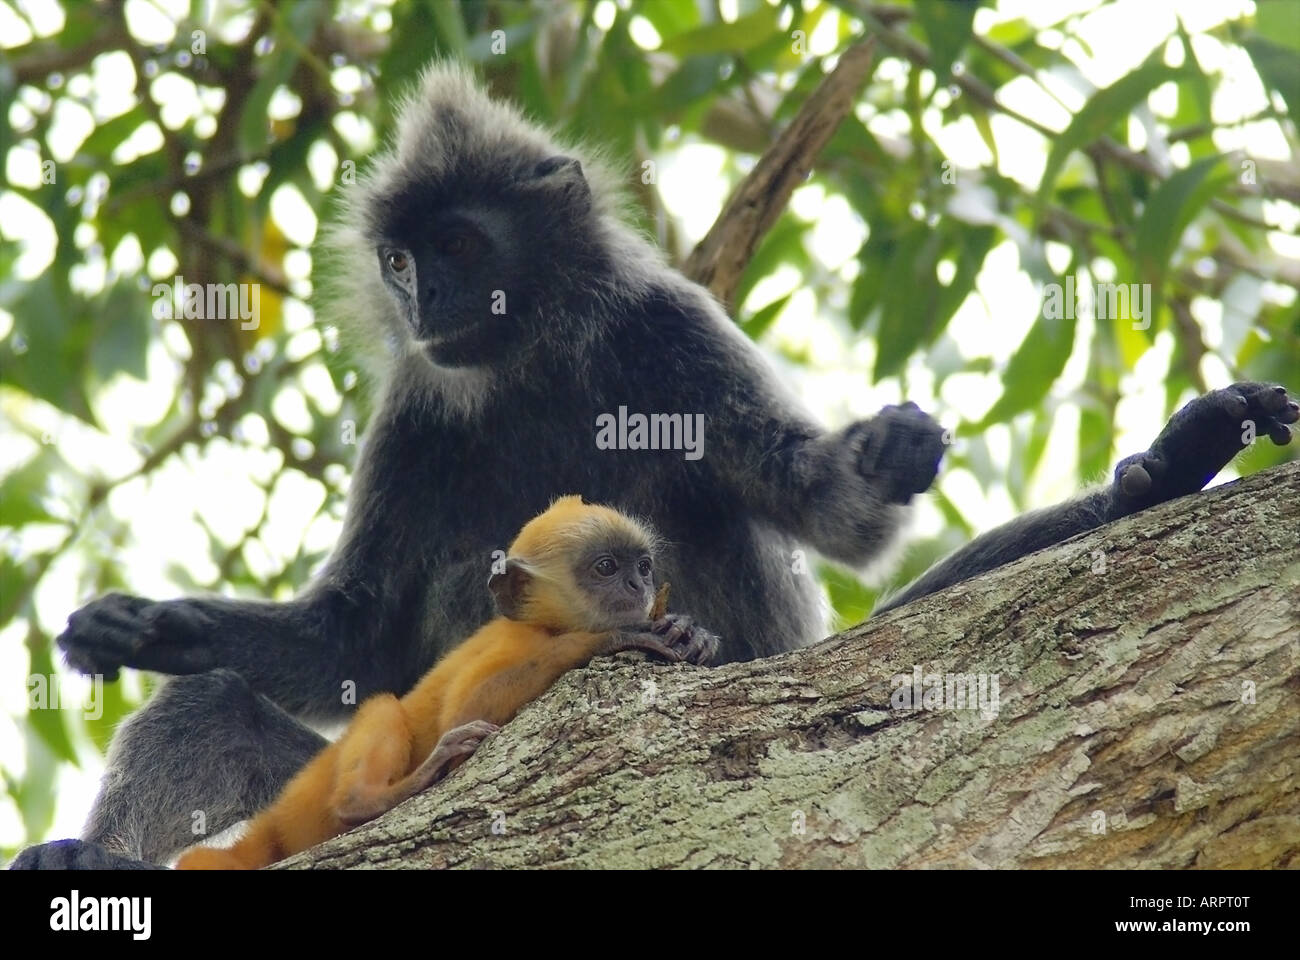 A Silverleaf Monkey Measures her baby Stock Photo